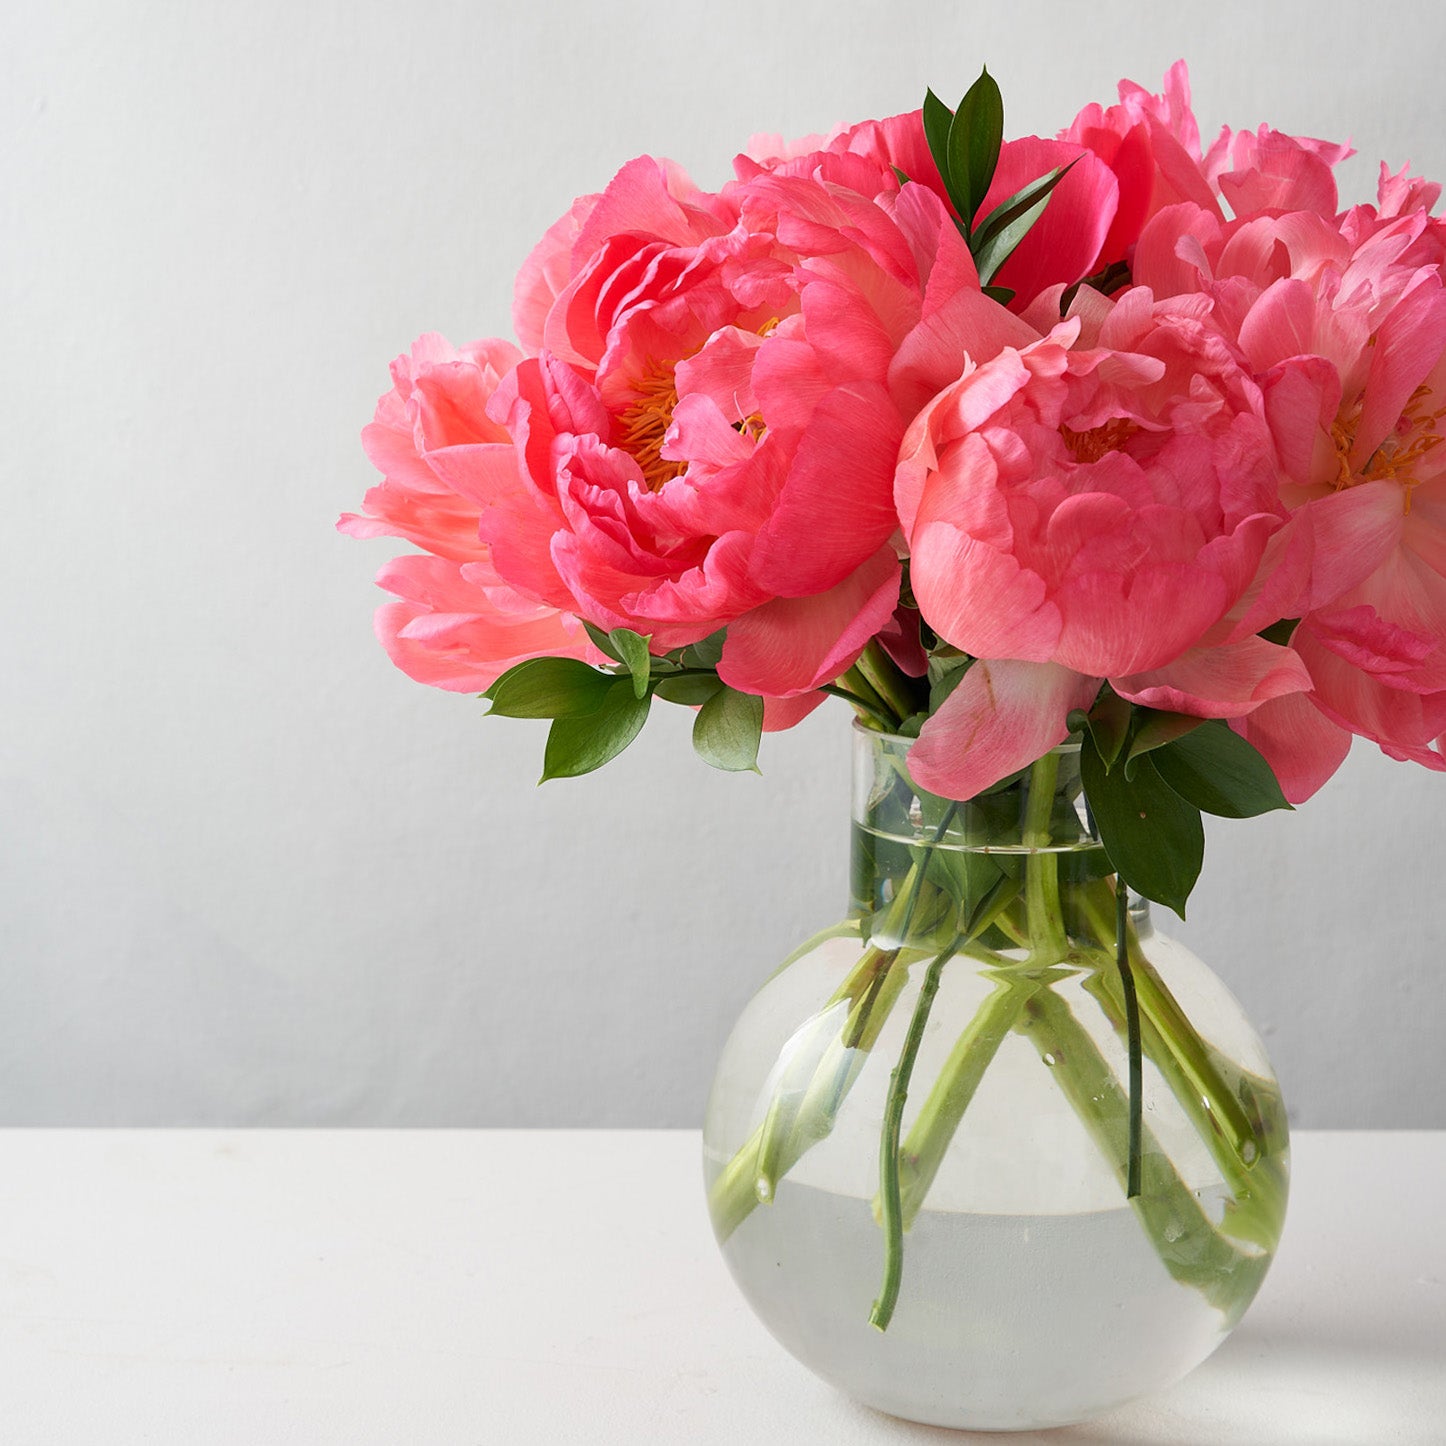 Round glass vase with coral peonies